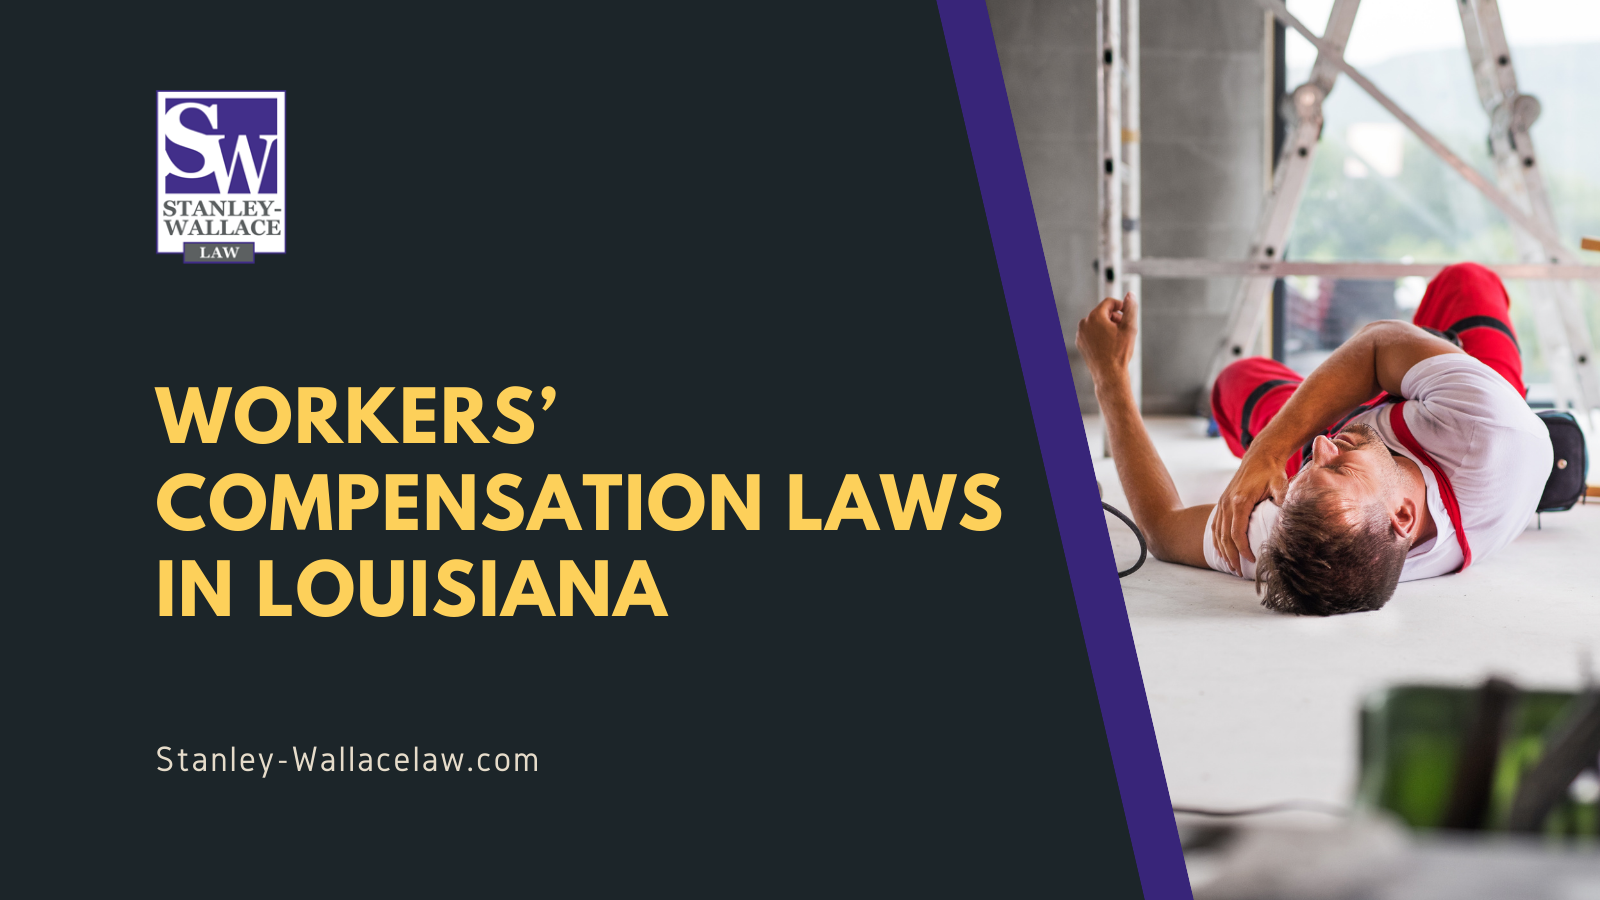 Workers’ Compensation Laws in Louisiana - Stanley-Wallace Law - slidell louisiana